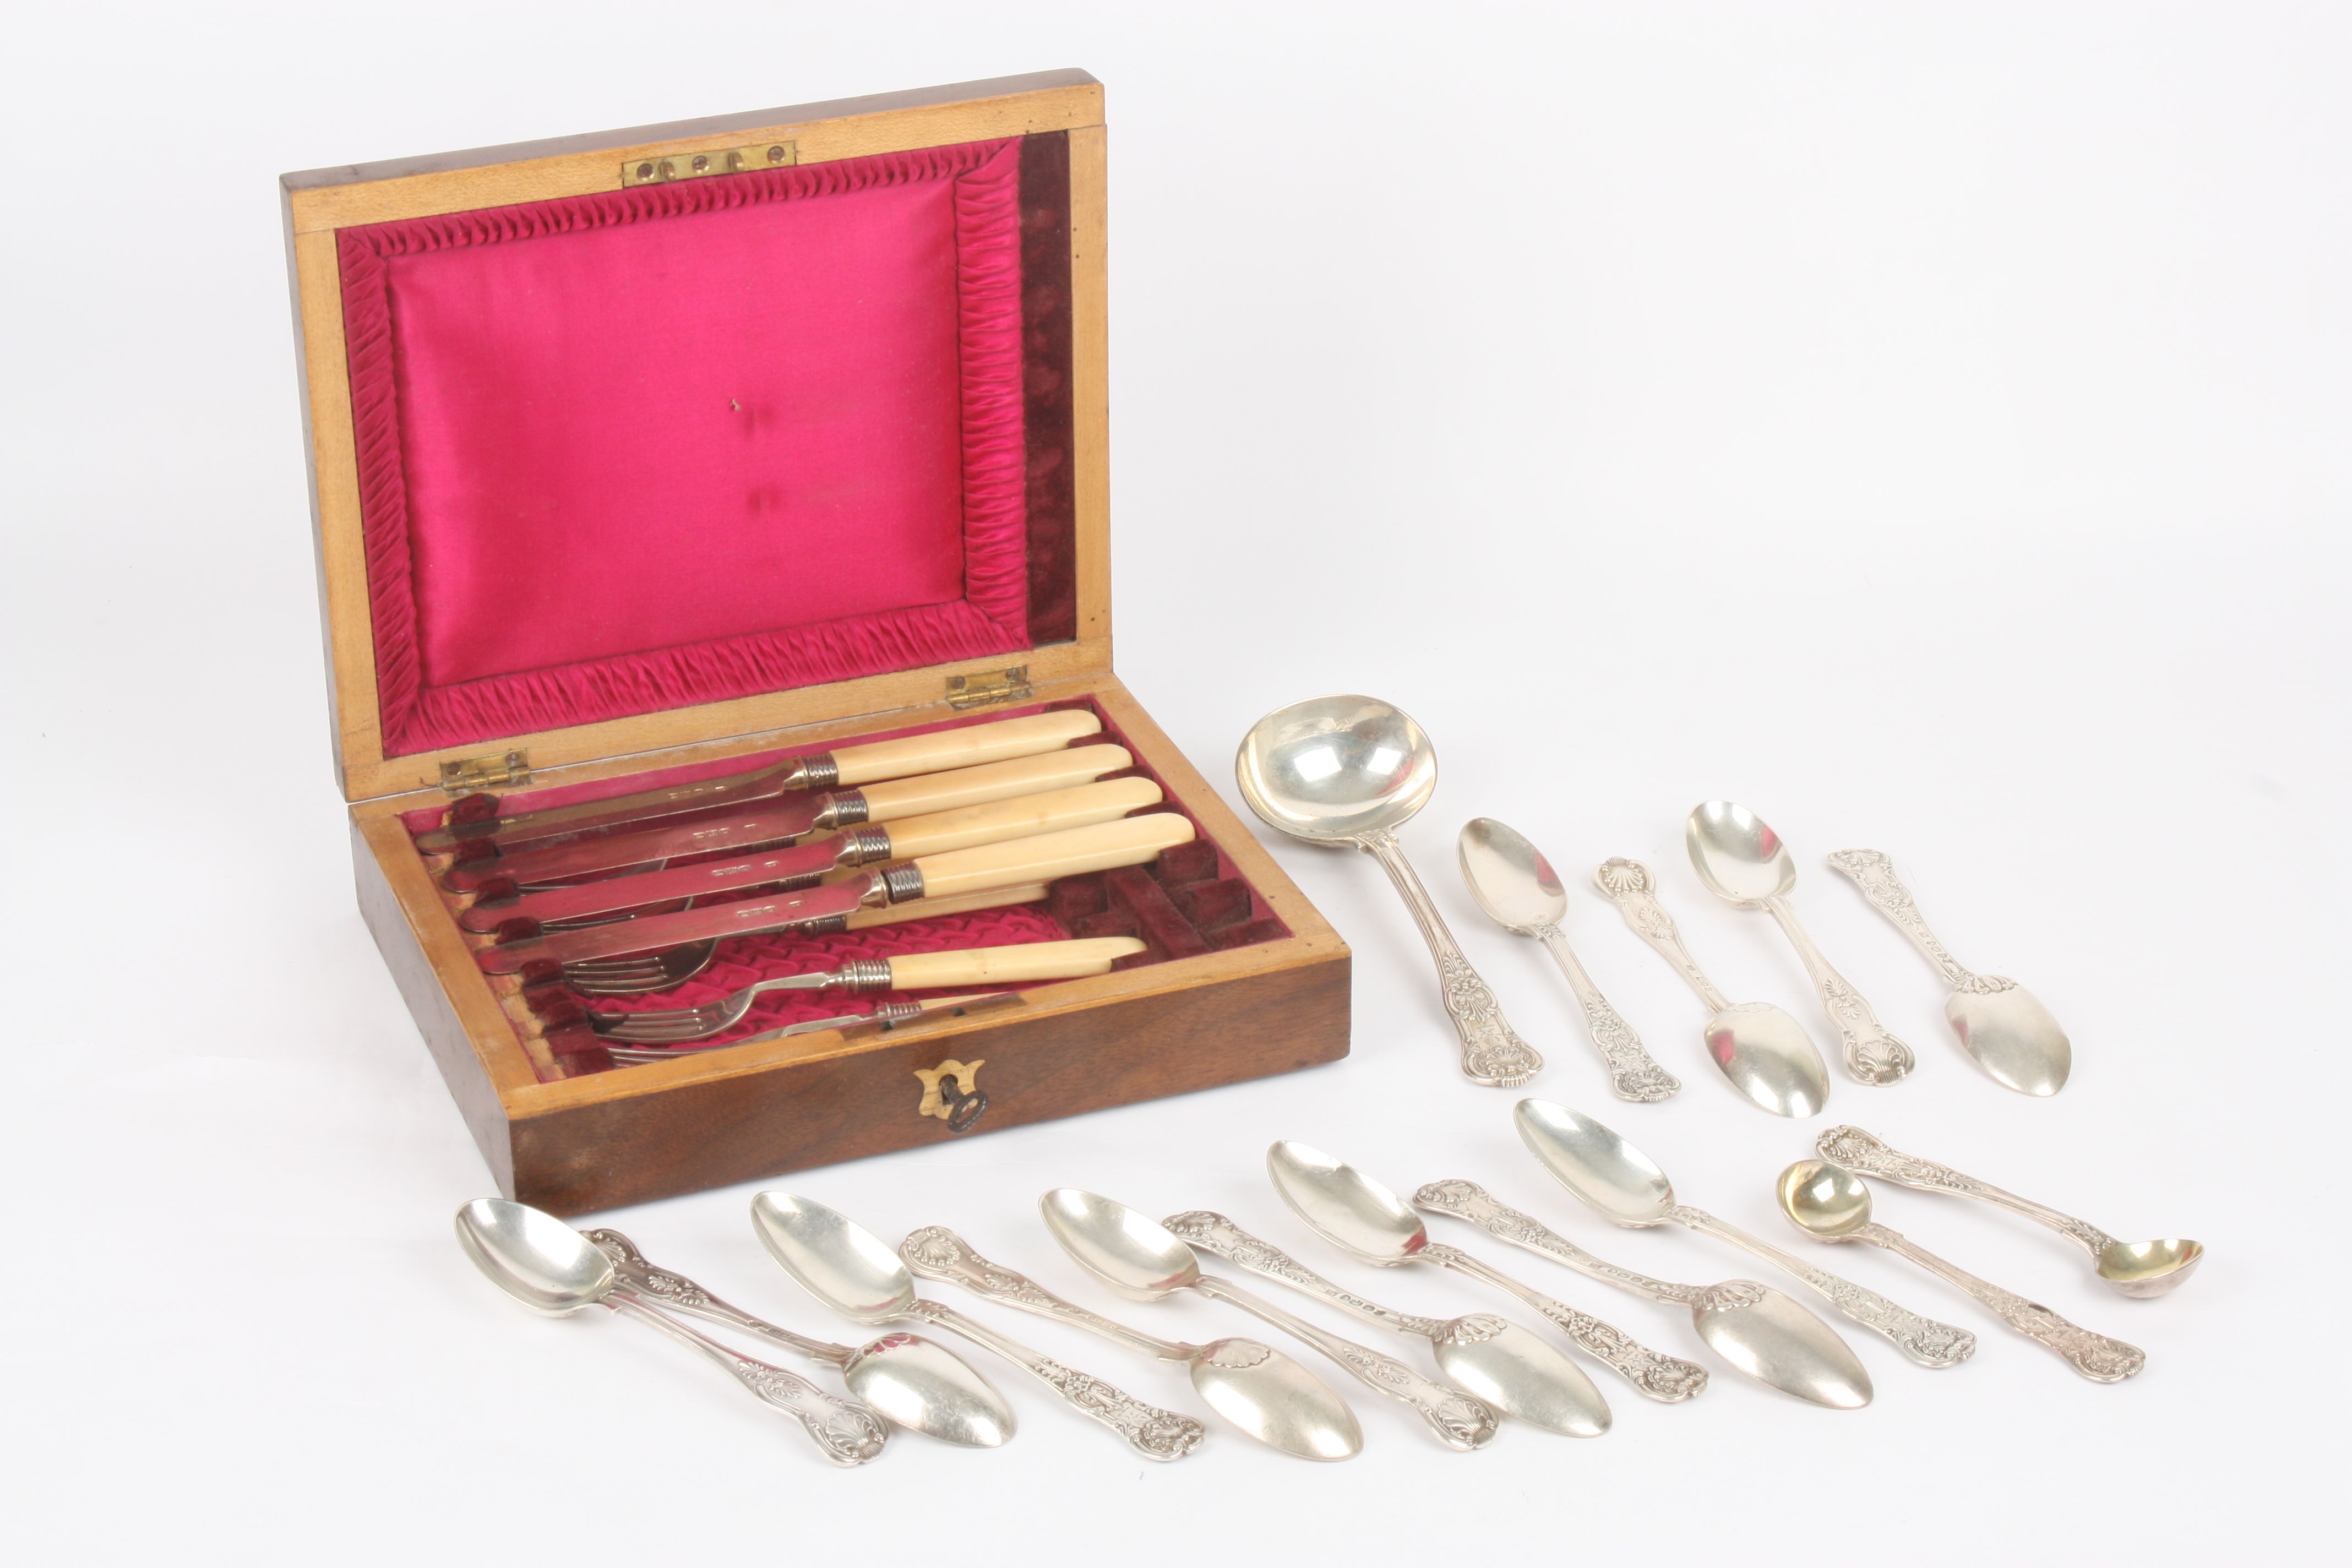 A quantity of silver spoons and boxed cutlery, comprising: 13 small desert spoons, 2 cruet spoons